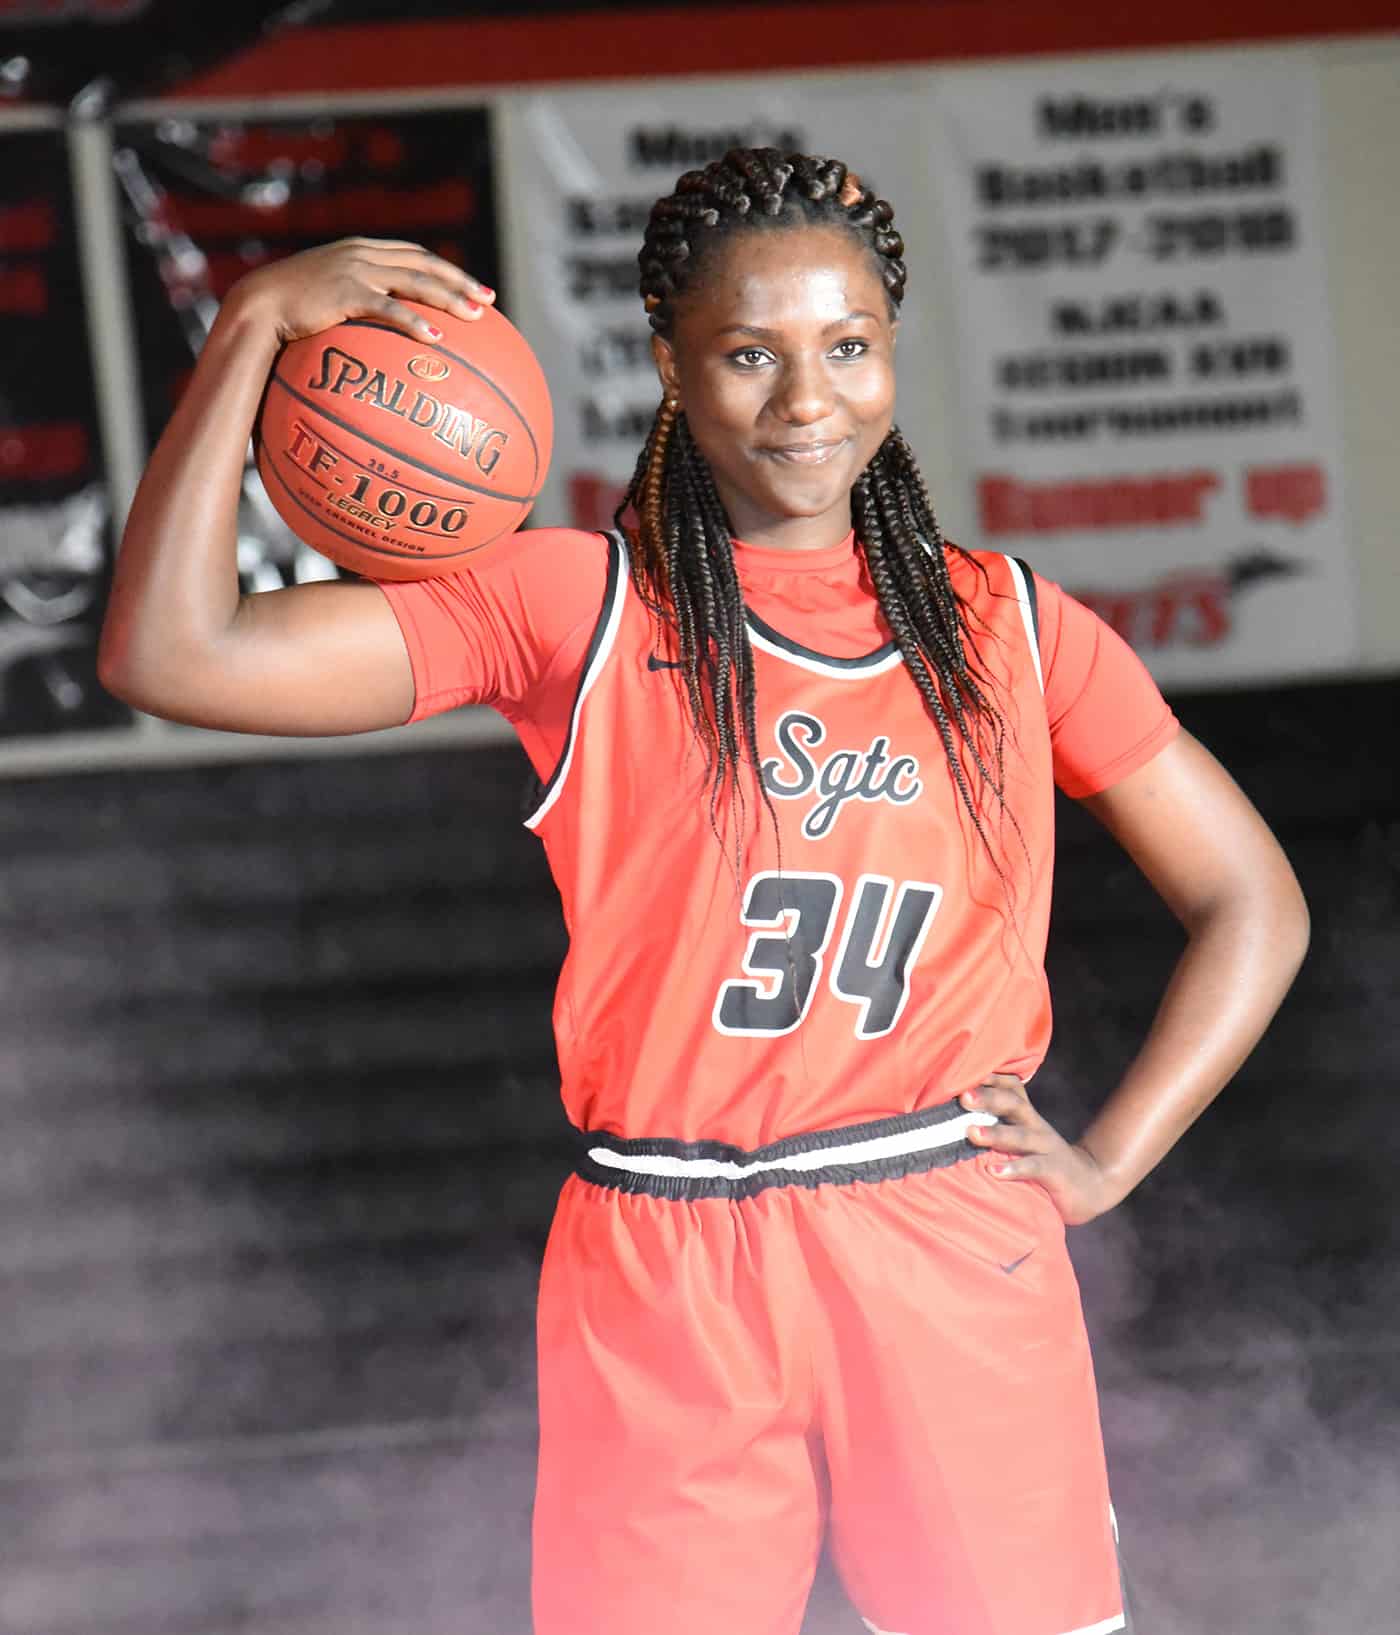 Femme Sikuzani, (34) 6’ 5” freshman center from Goma, Democratic Republic of the Congo, had a double-double night with 20 rebounds and 14 points.